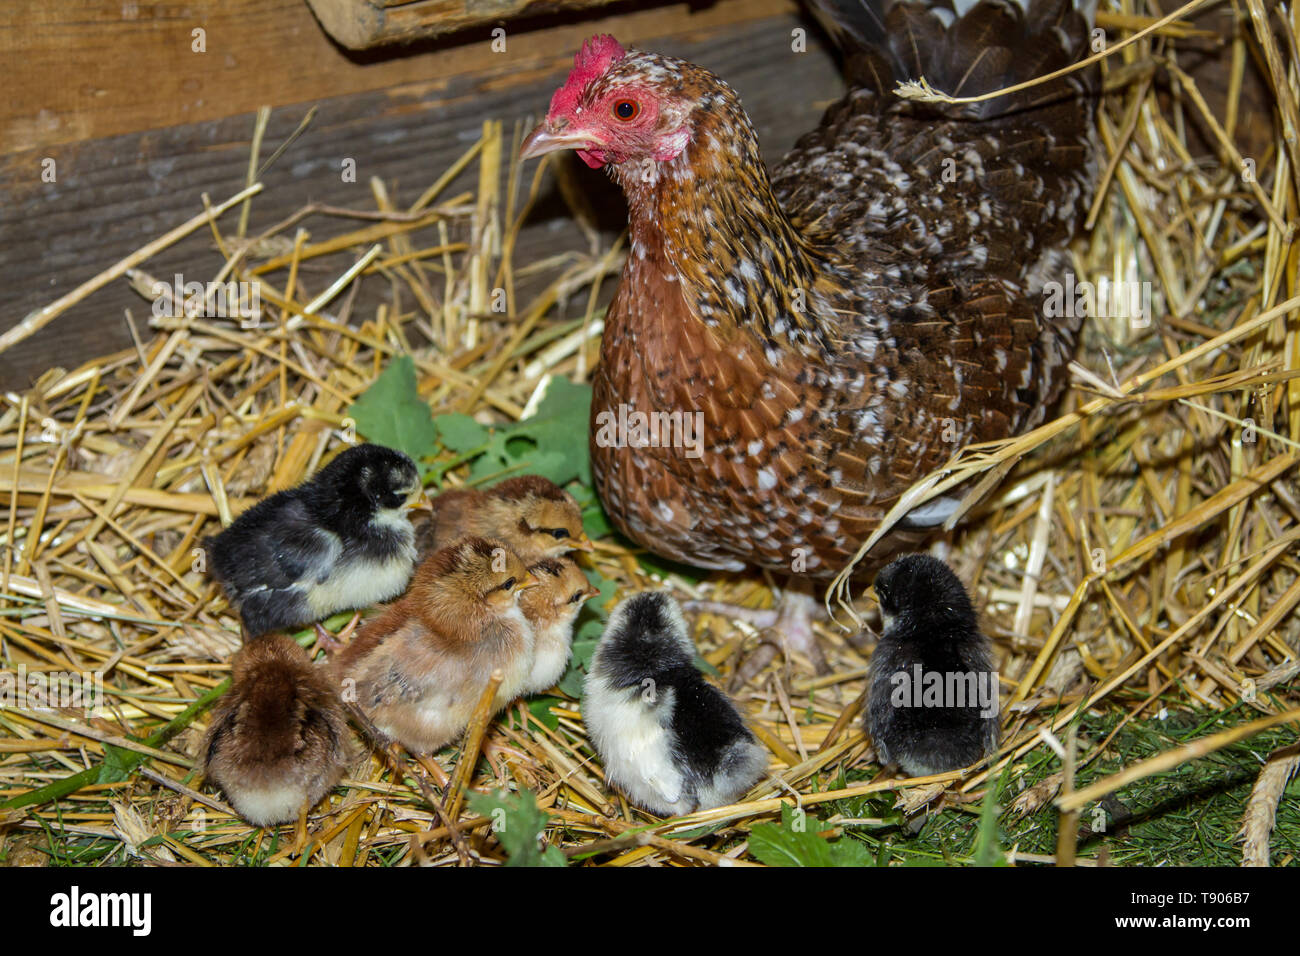 Stoapiperl, Steinhendl - mother hen and fledglings - critically endangered chicken breed from Austria Stock Photo